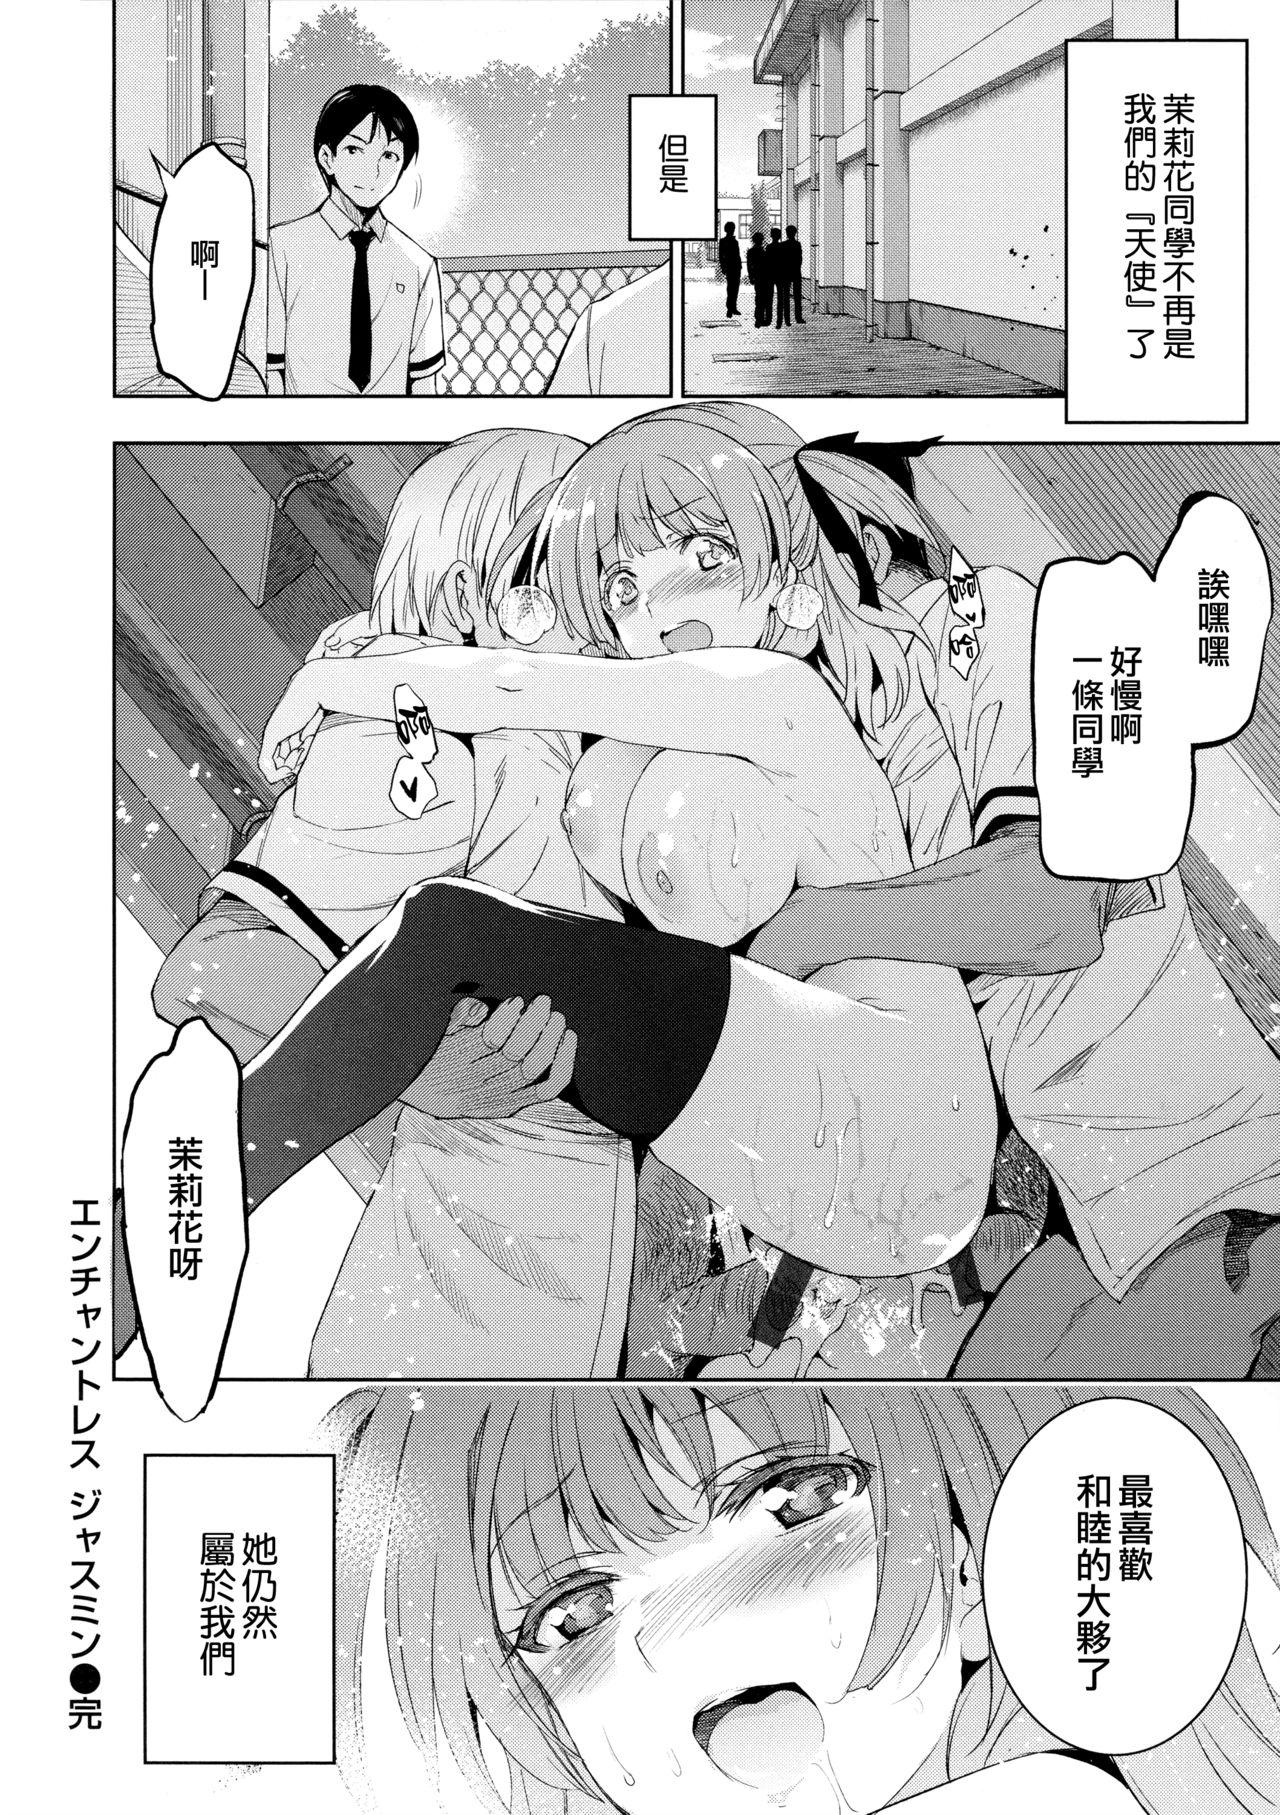 Young Old [Inue Shinsuke] Hime-sama Otoshi - Fallen Princesses Ch. 1-6 [Chinese] [無邪気漢化組] Super - Page 182